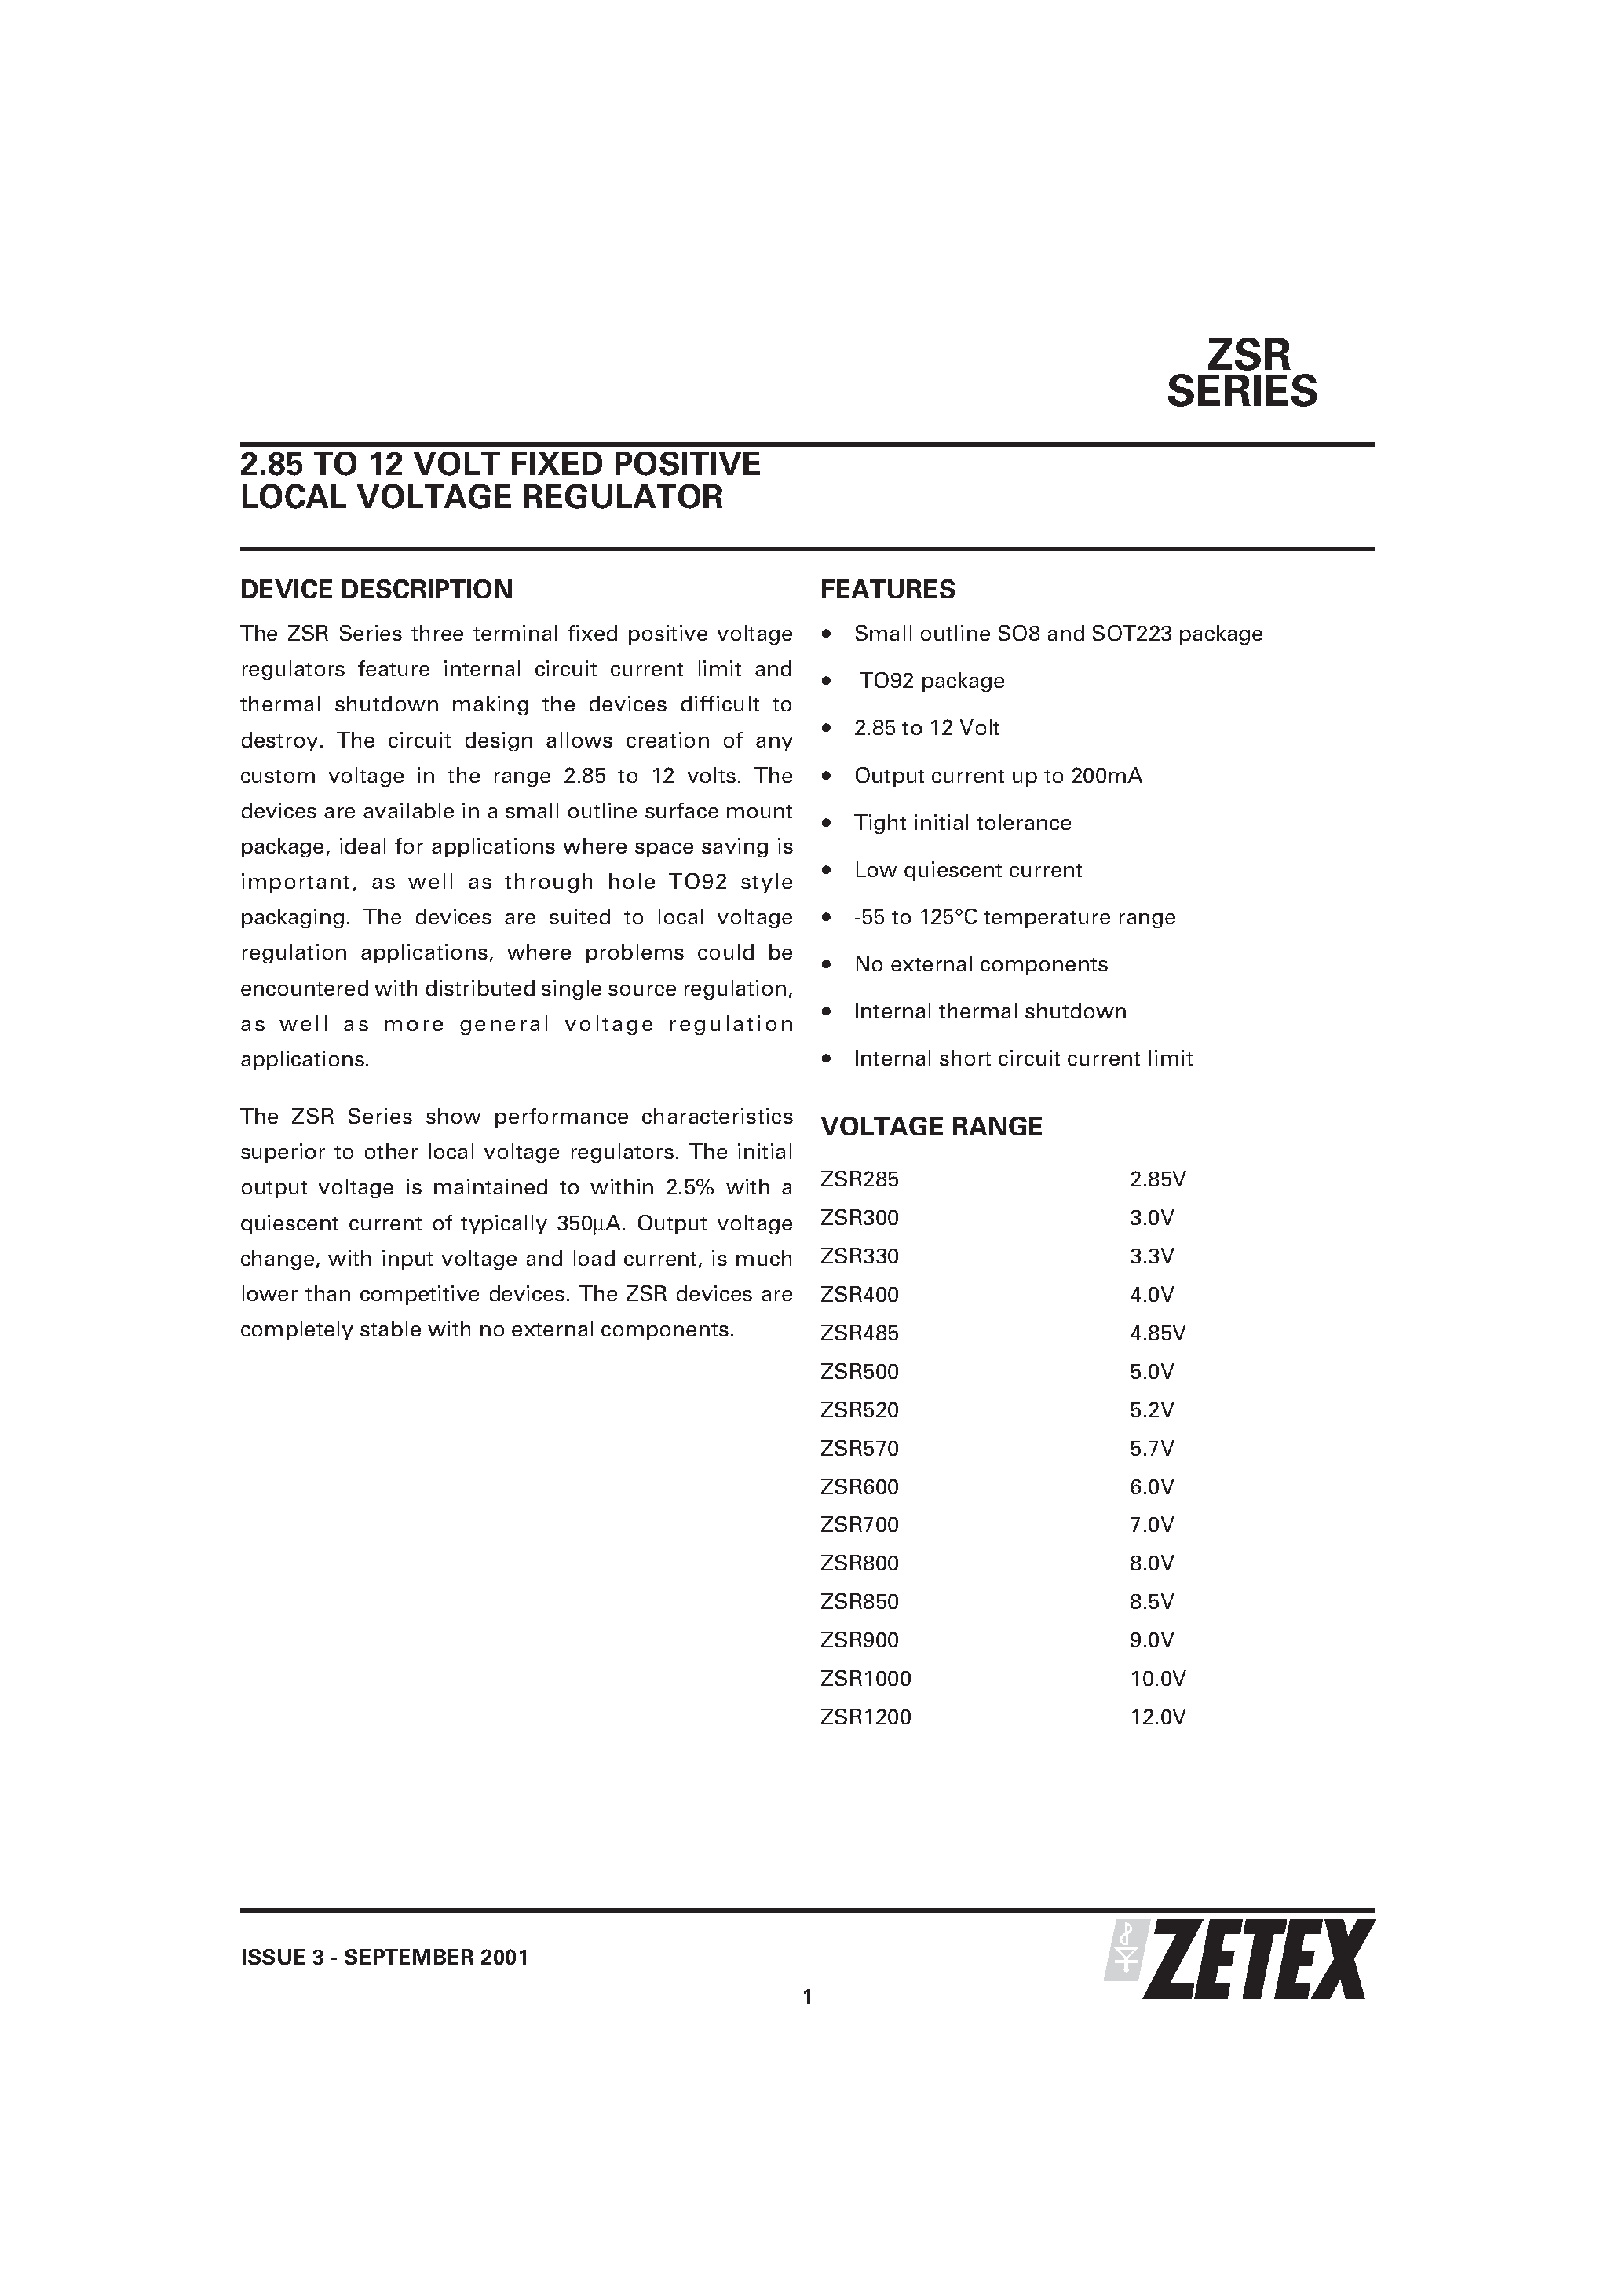 Datasheet ZSR800 - 2.85 TO 12 VOLT FIXED POSITIVE LOCAL VOLTAGE REGULATOR page 1